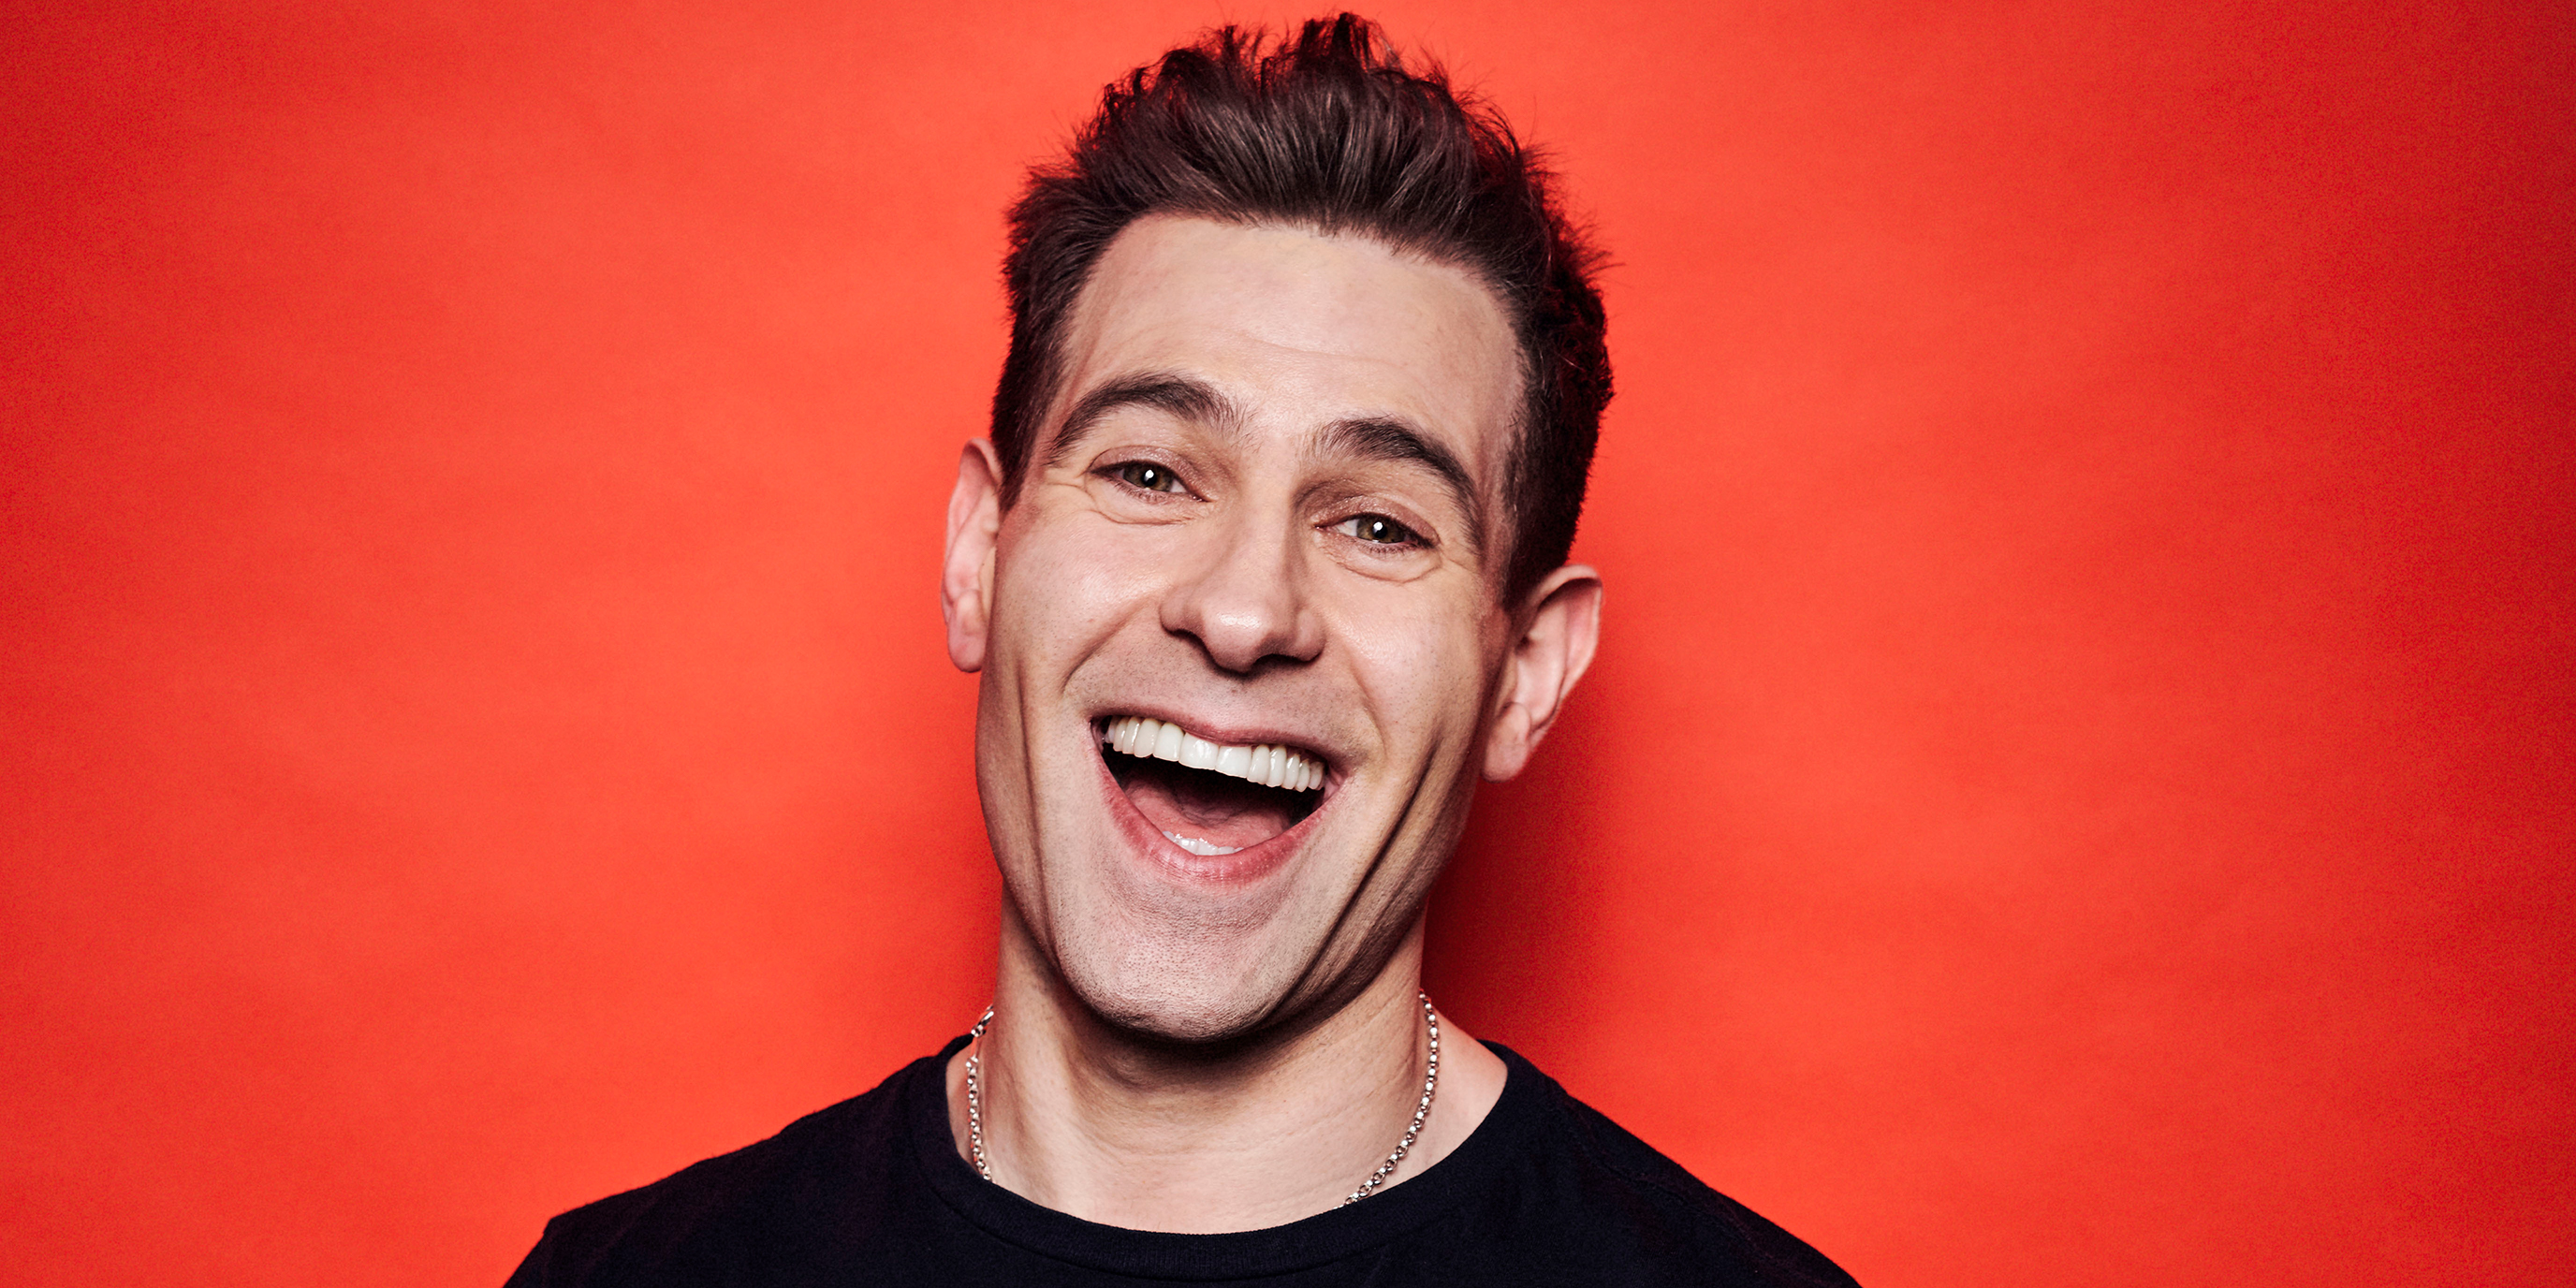 SIMON BRODKIN PERFORMS AS HIMSELF FOR THE FIRST TIME EVER AT THE 2019 EDINBURGH FRINGE